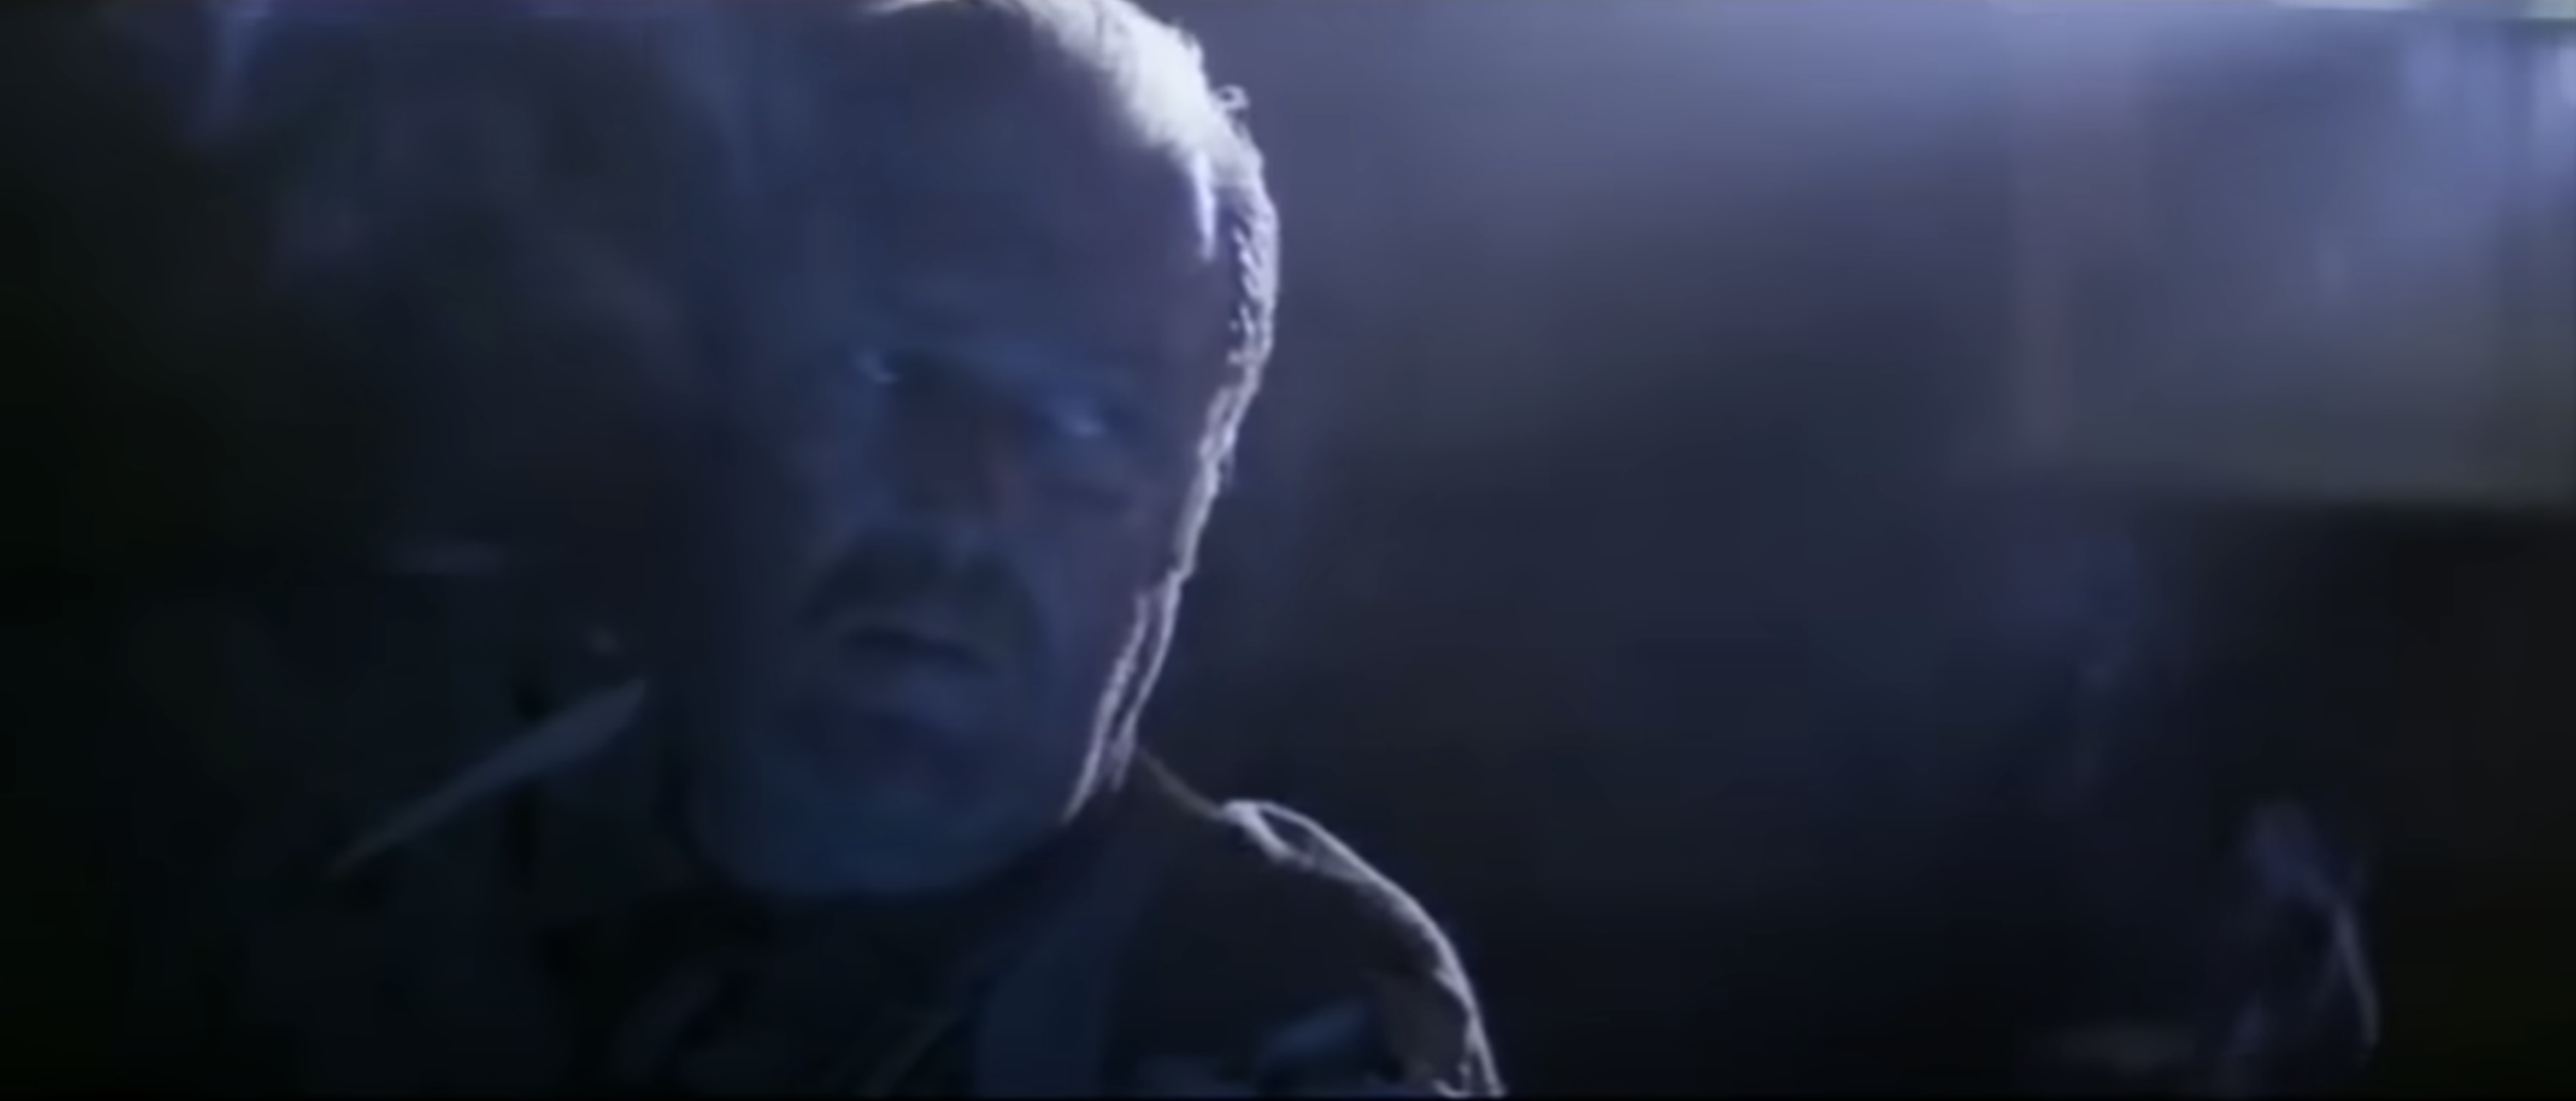 Emmet Walsh in "Blade Runner," circa 1982. | Source: YouTube/Rotten Tomatoes Classic Trailers